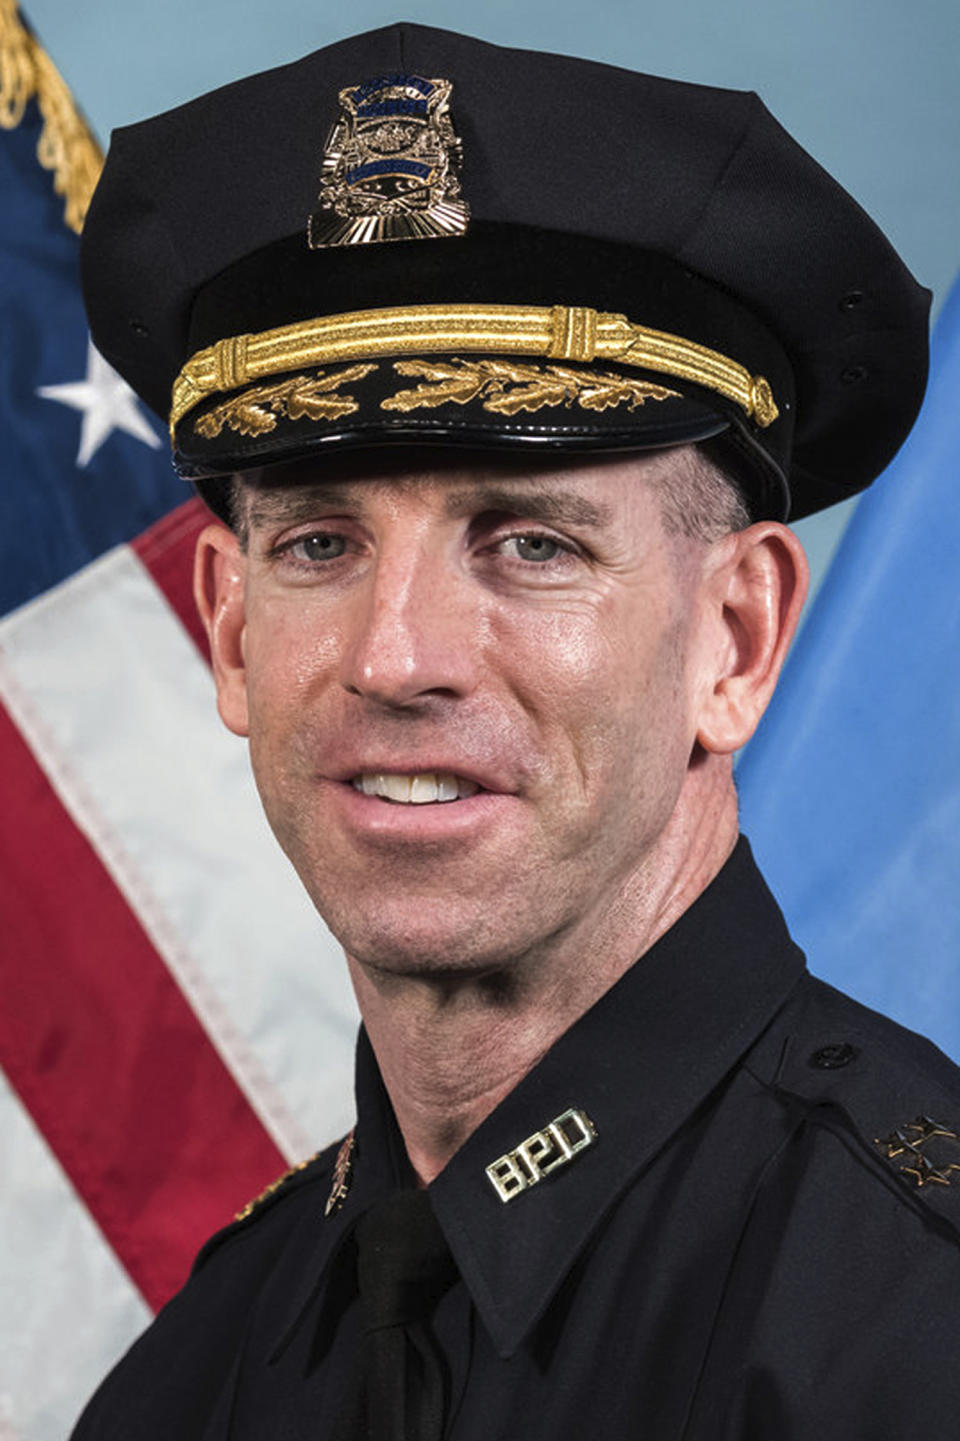 This undated photo released on the official Boston Police Department website shows Superintendent-in-Chief Gregory Long. Long is leading the department while lawyers investigate domestic violence allegations against Police Commissioner Dennis White, who was elevated to the post on Feb. 1, 2021, after Commissioner William Gross retired. (Boston Police Department via AP)